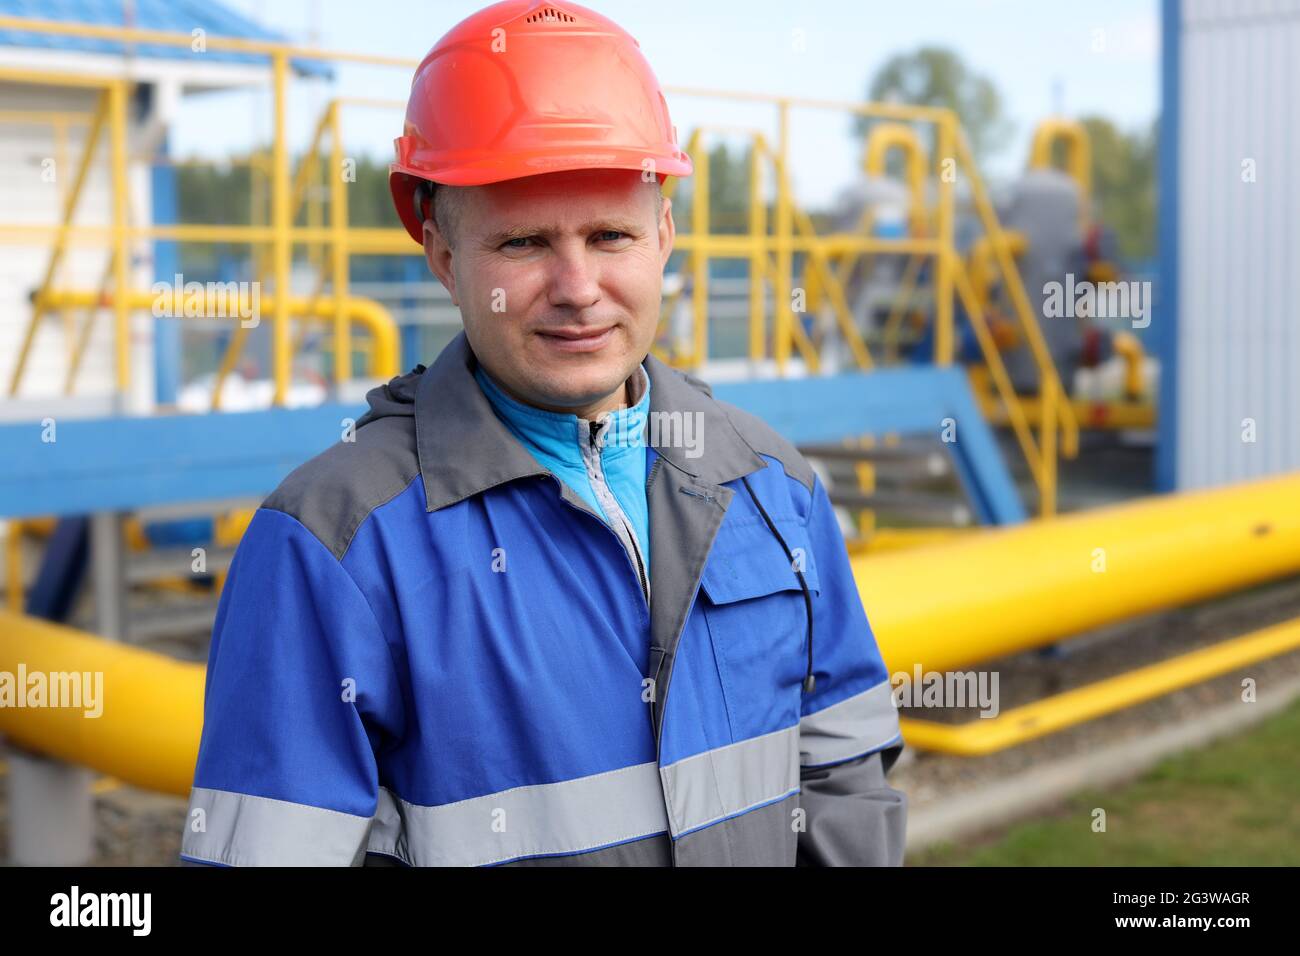 Engineer in hard hat and overalls at the production facility. a real portrait of a gas industry worker. Stock Photo